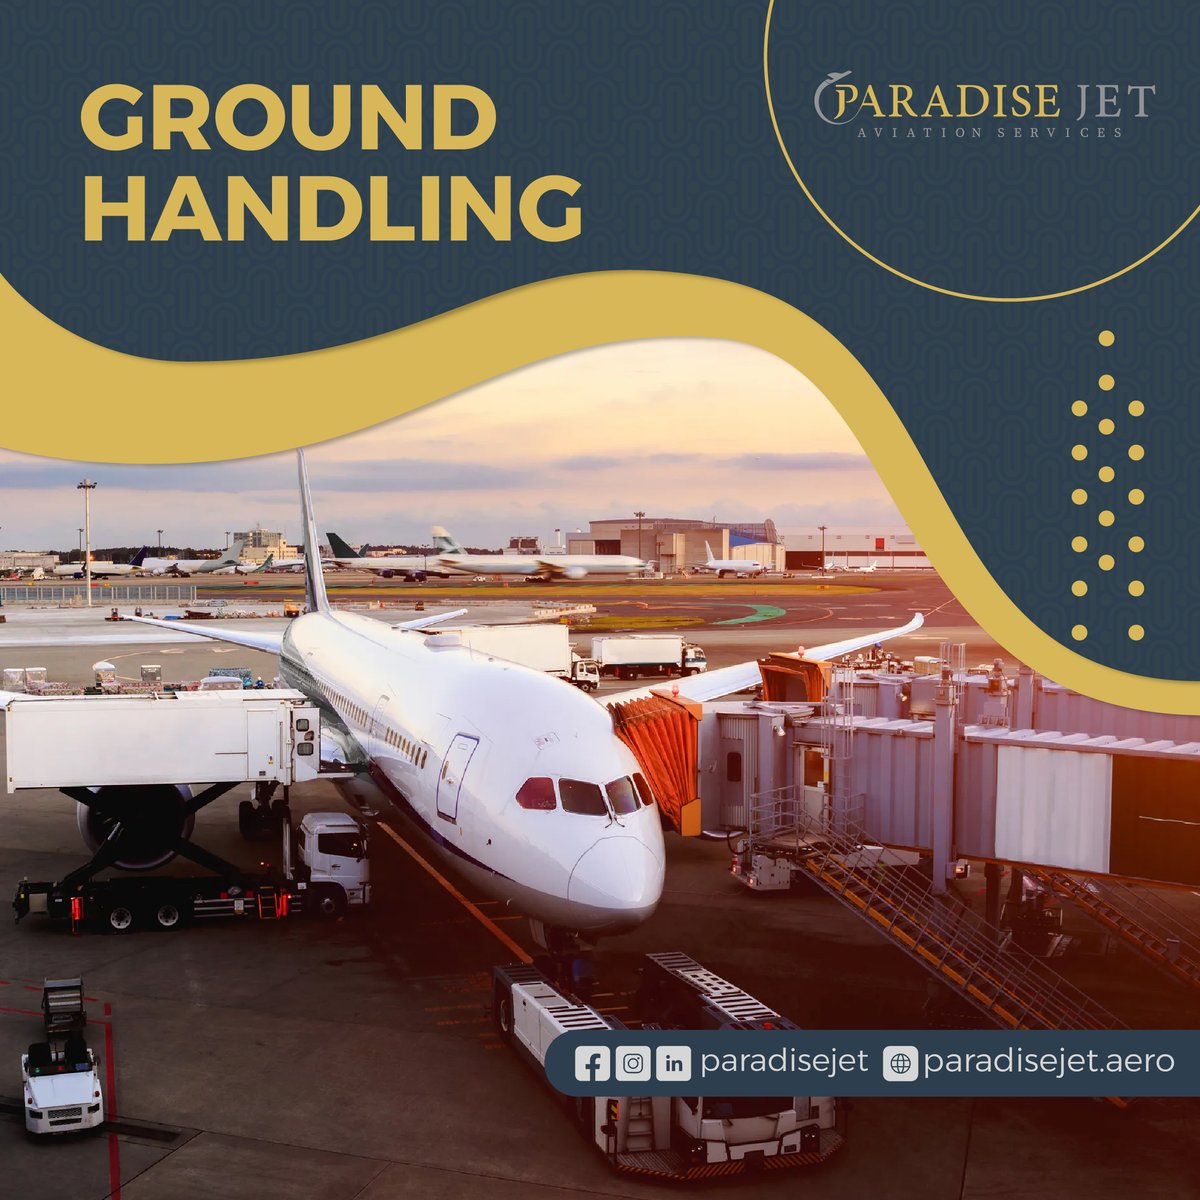 Leave the #logistics, focus on the #deal. Our #seamless #ground_handling ensures smooth #arrivals, #punctual departures, and everything in between. More time for #business, less time for #airport hassles.
#paradisejet #flightsupport #groundsupport #groundhandlers #privatejet
#FBO